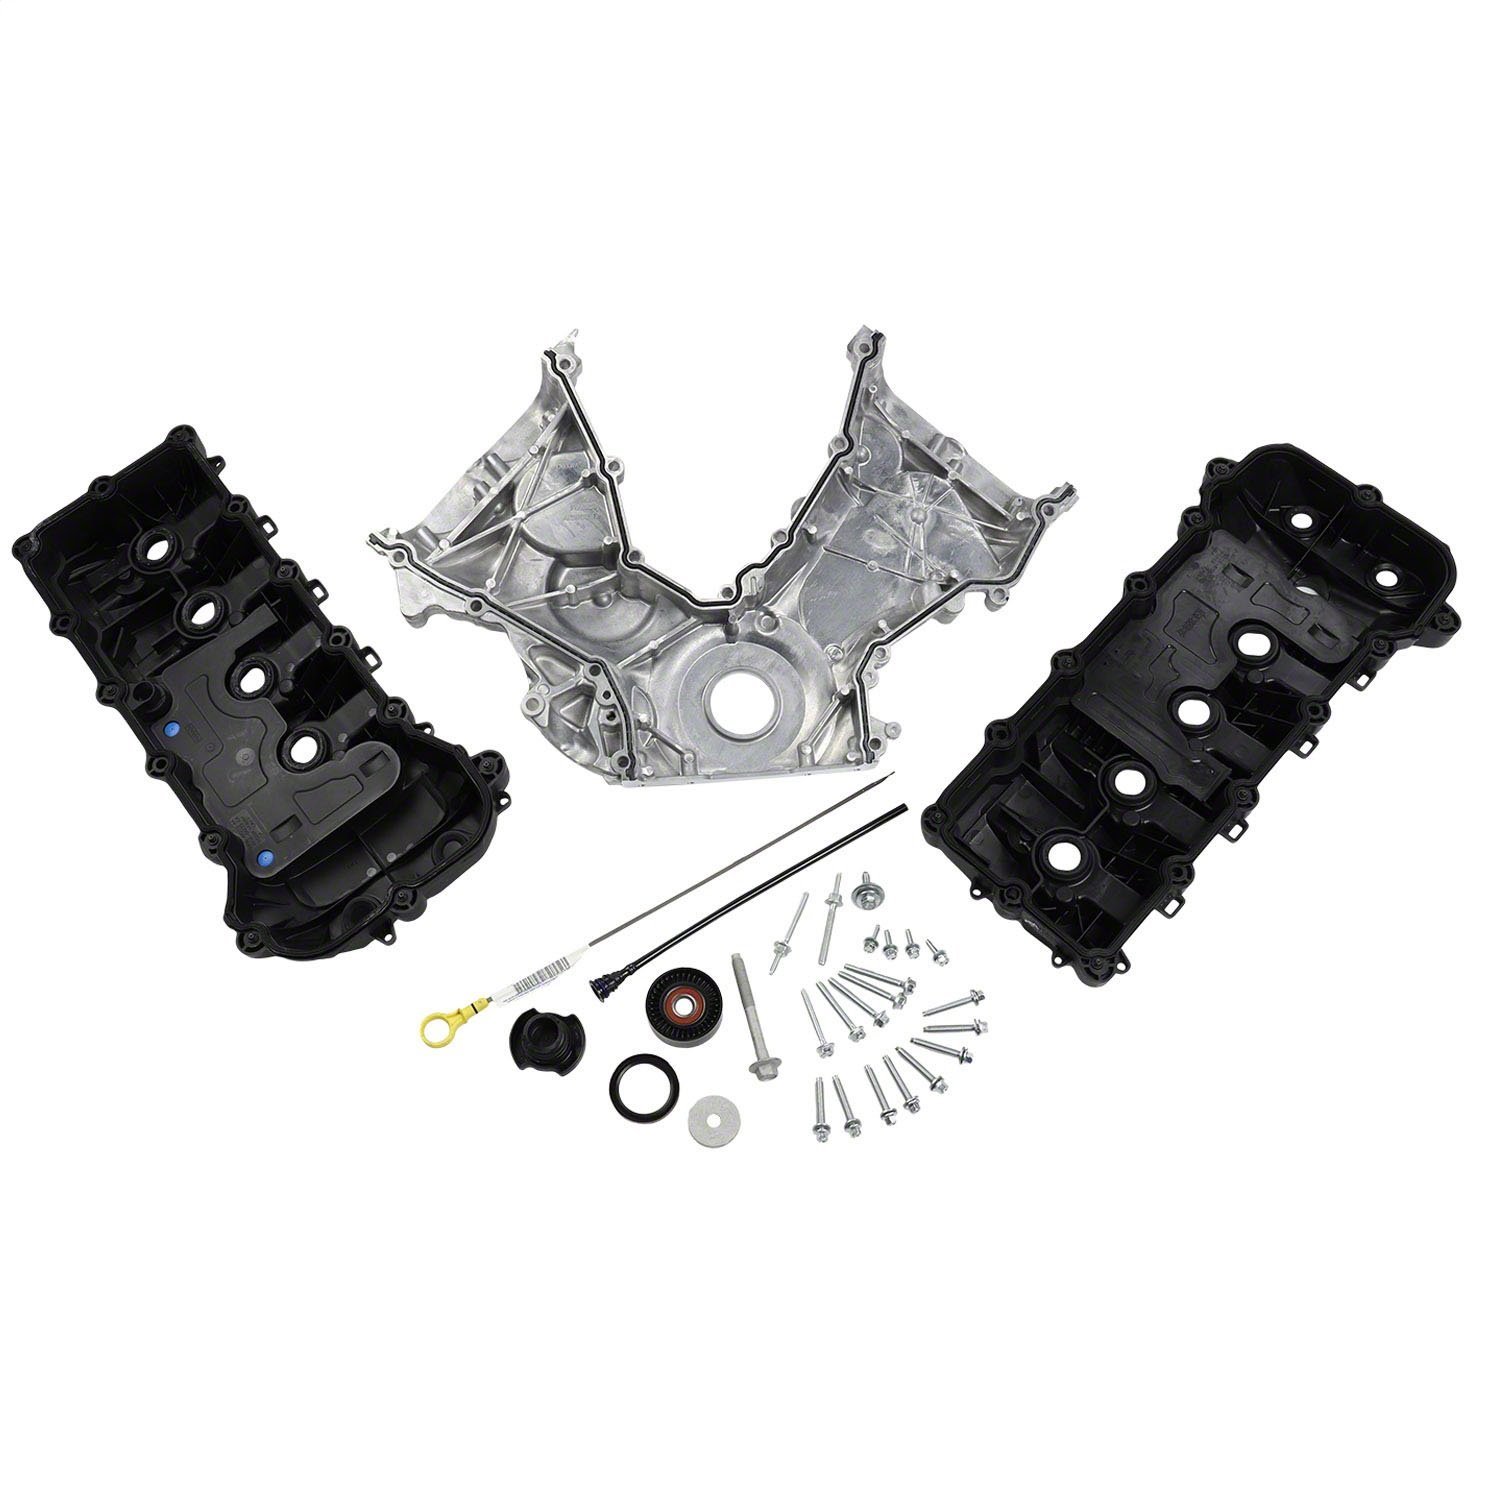 M-6580-M50 Timing & Cam Cover Kit for 2011-2015 Ford Mustang 5.0L Coyote